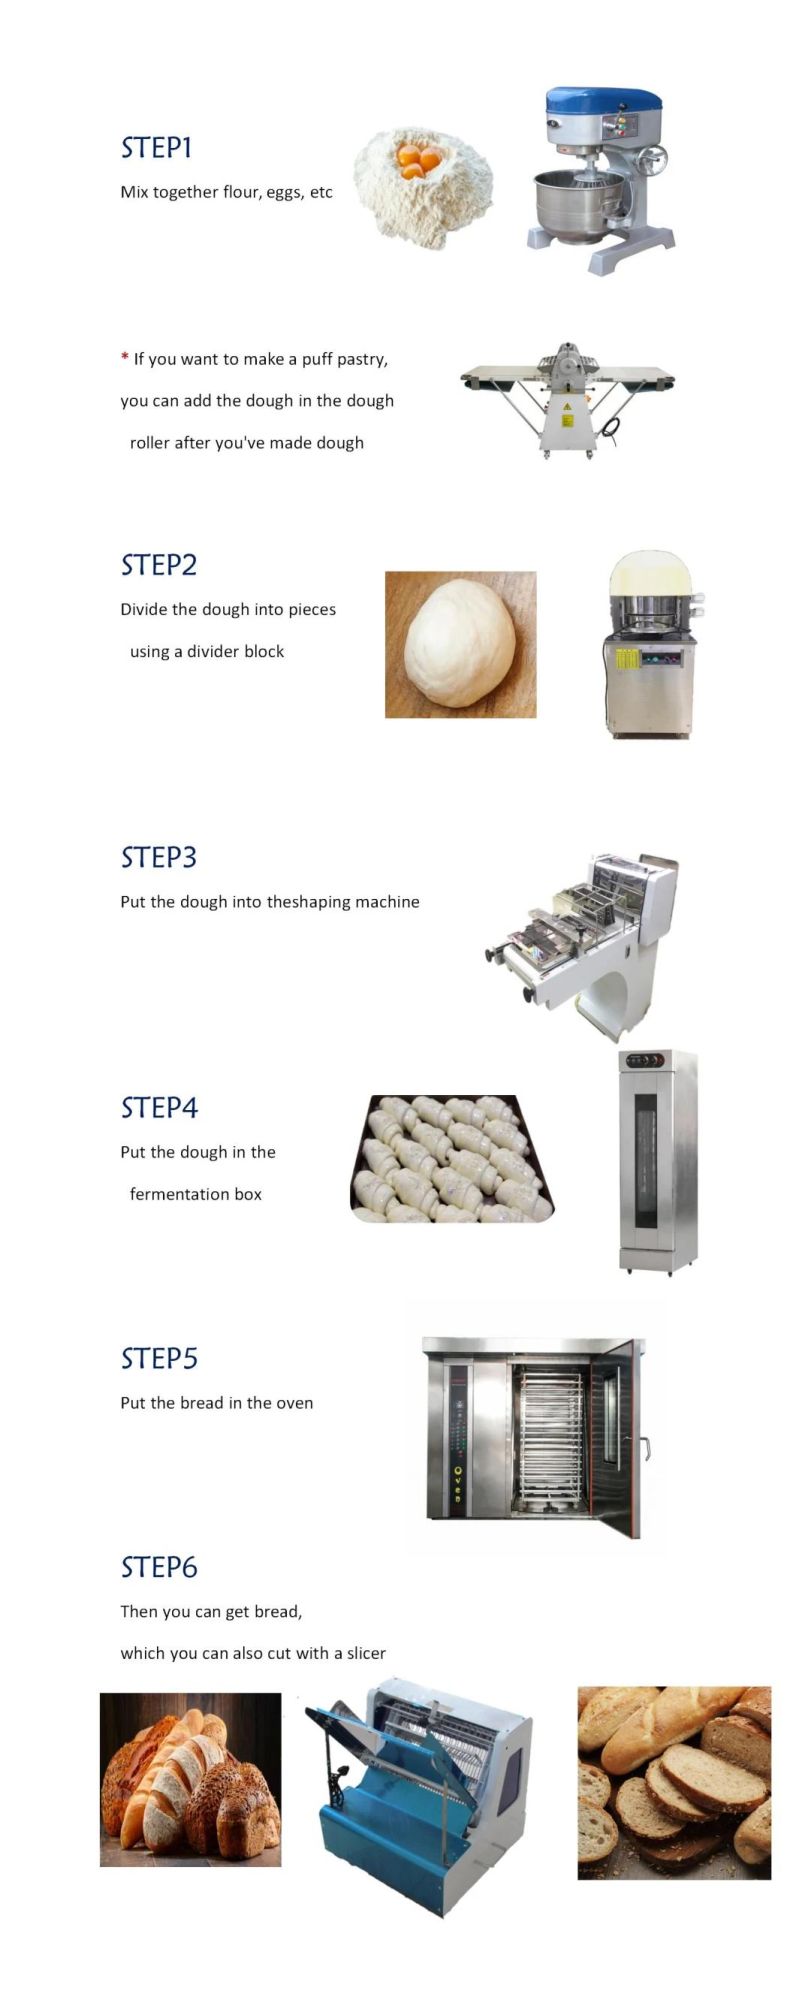 Jingyao Commercial Baking Rotary Ovens Equipment Stainless Steel for Restaurant or Cake Shop and Hotel